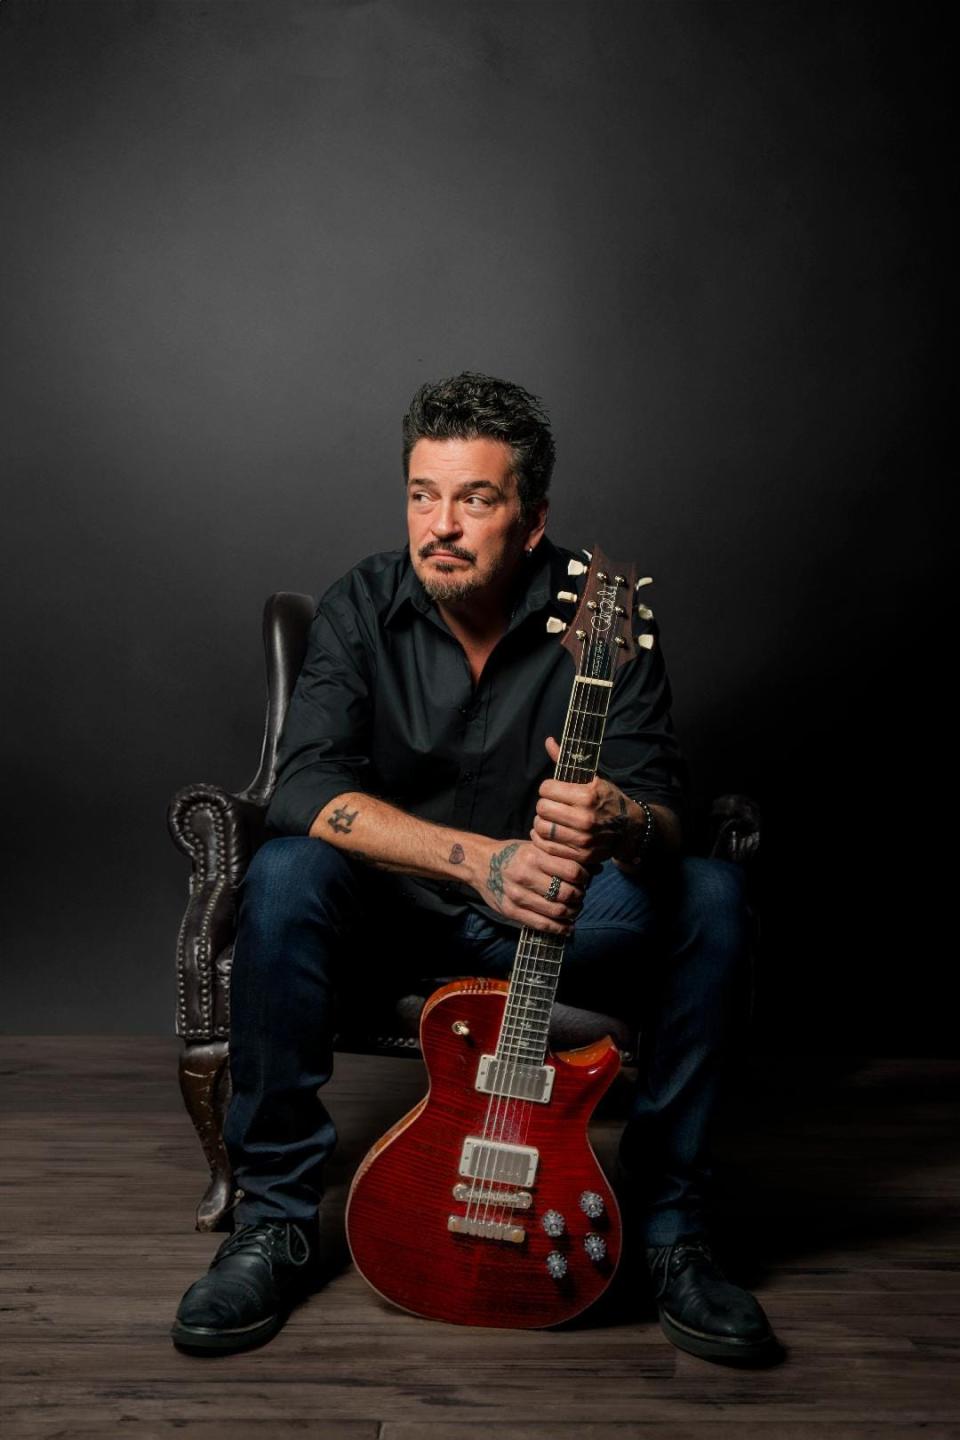 Blues artis Mike Zito is in the area this weekend, with a Friday night show at The Music Room in West Yarmouth, and a Saturday show at the Spire Center in Plymouth.